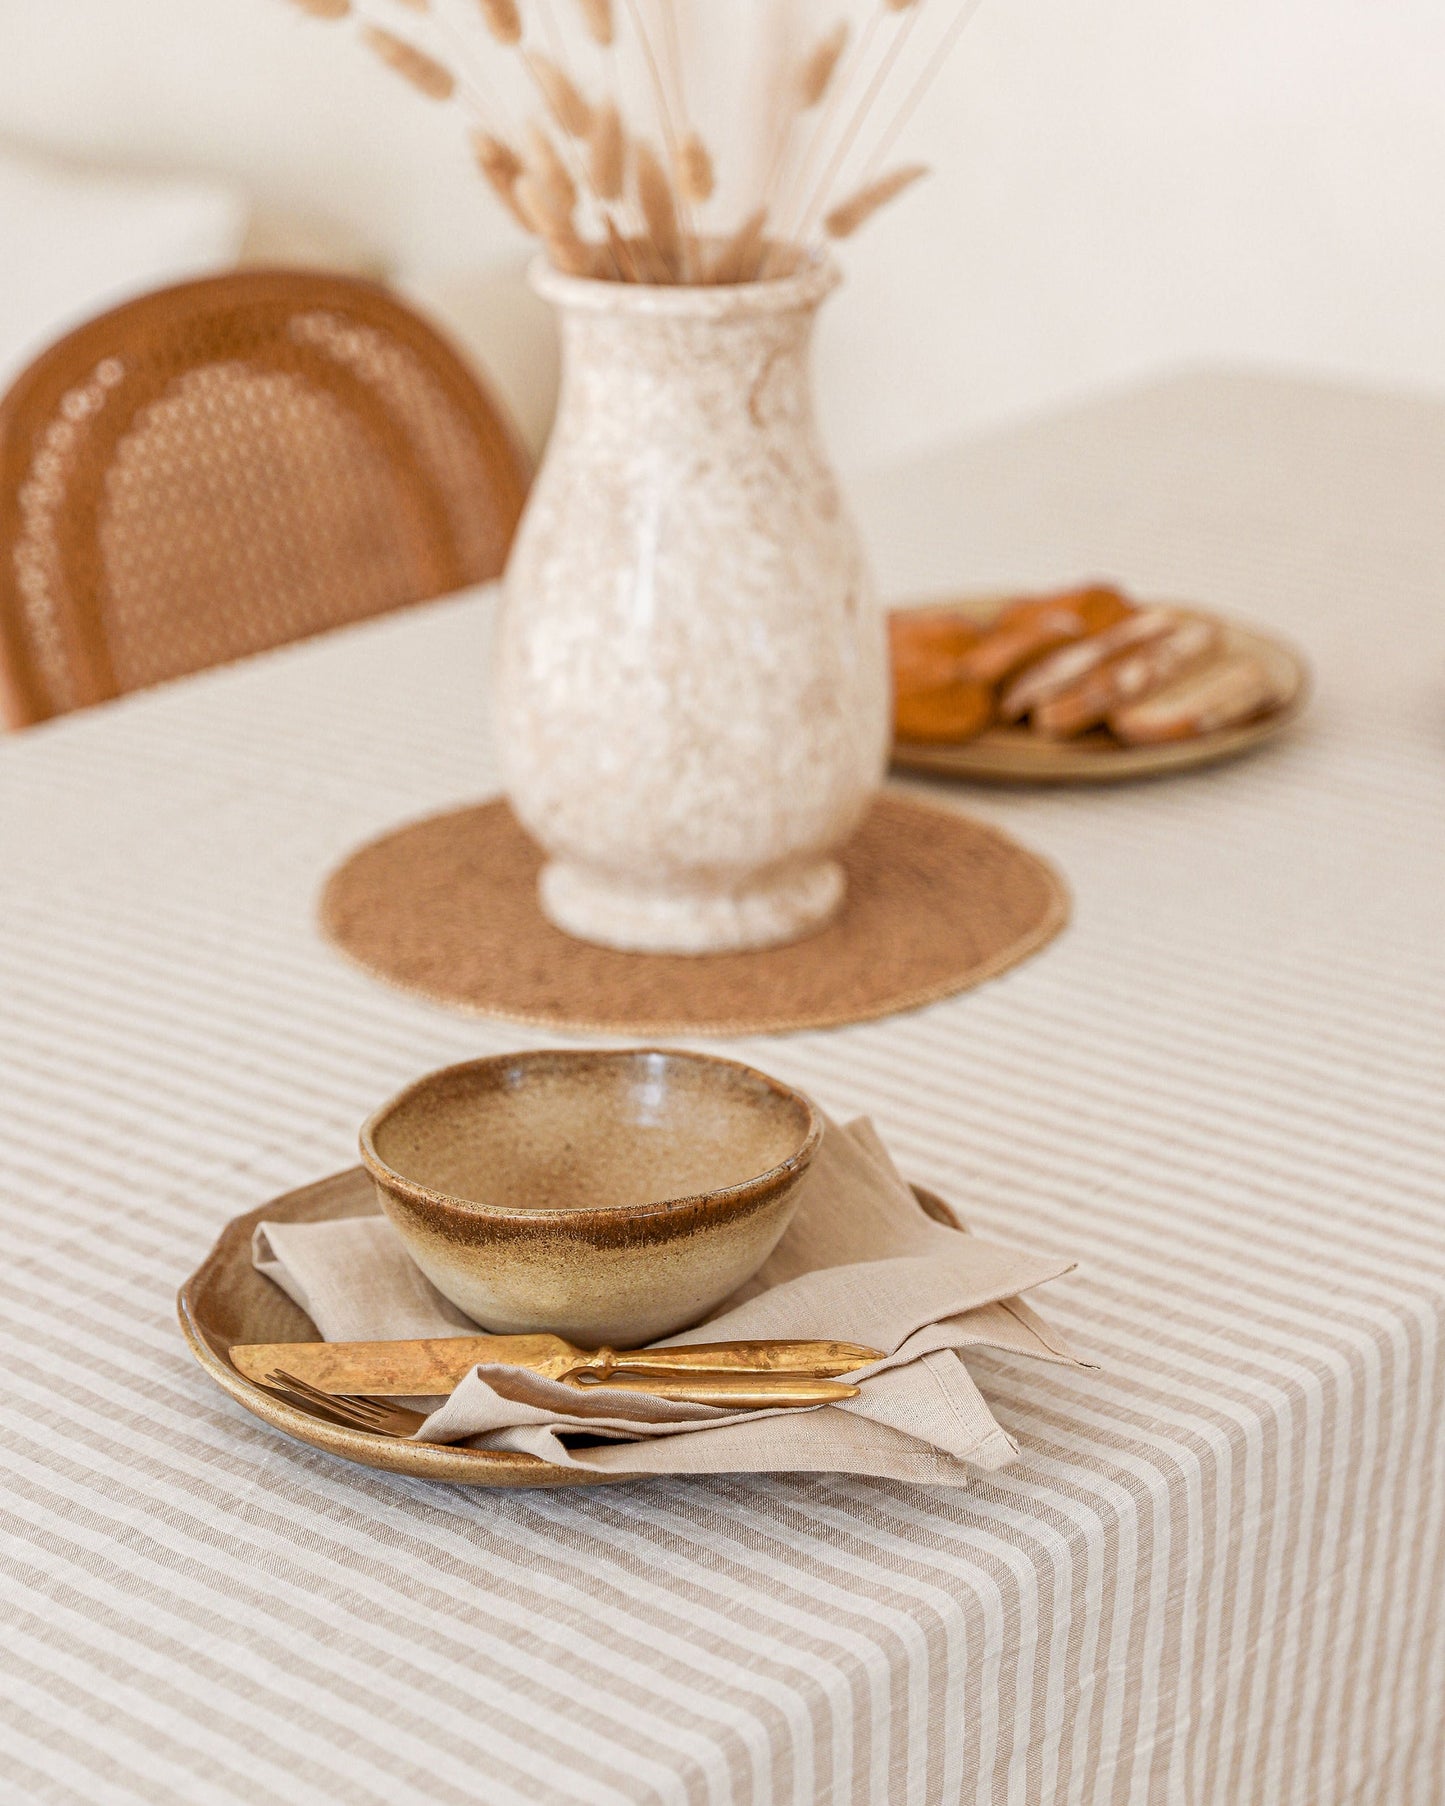 Striped in natural linen napkin set of 2 - MagicLinen